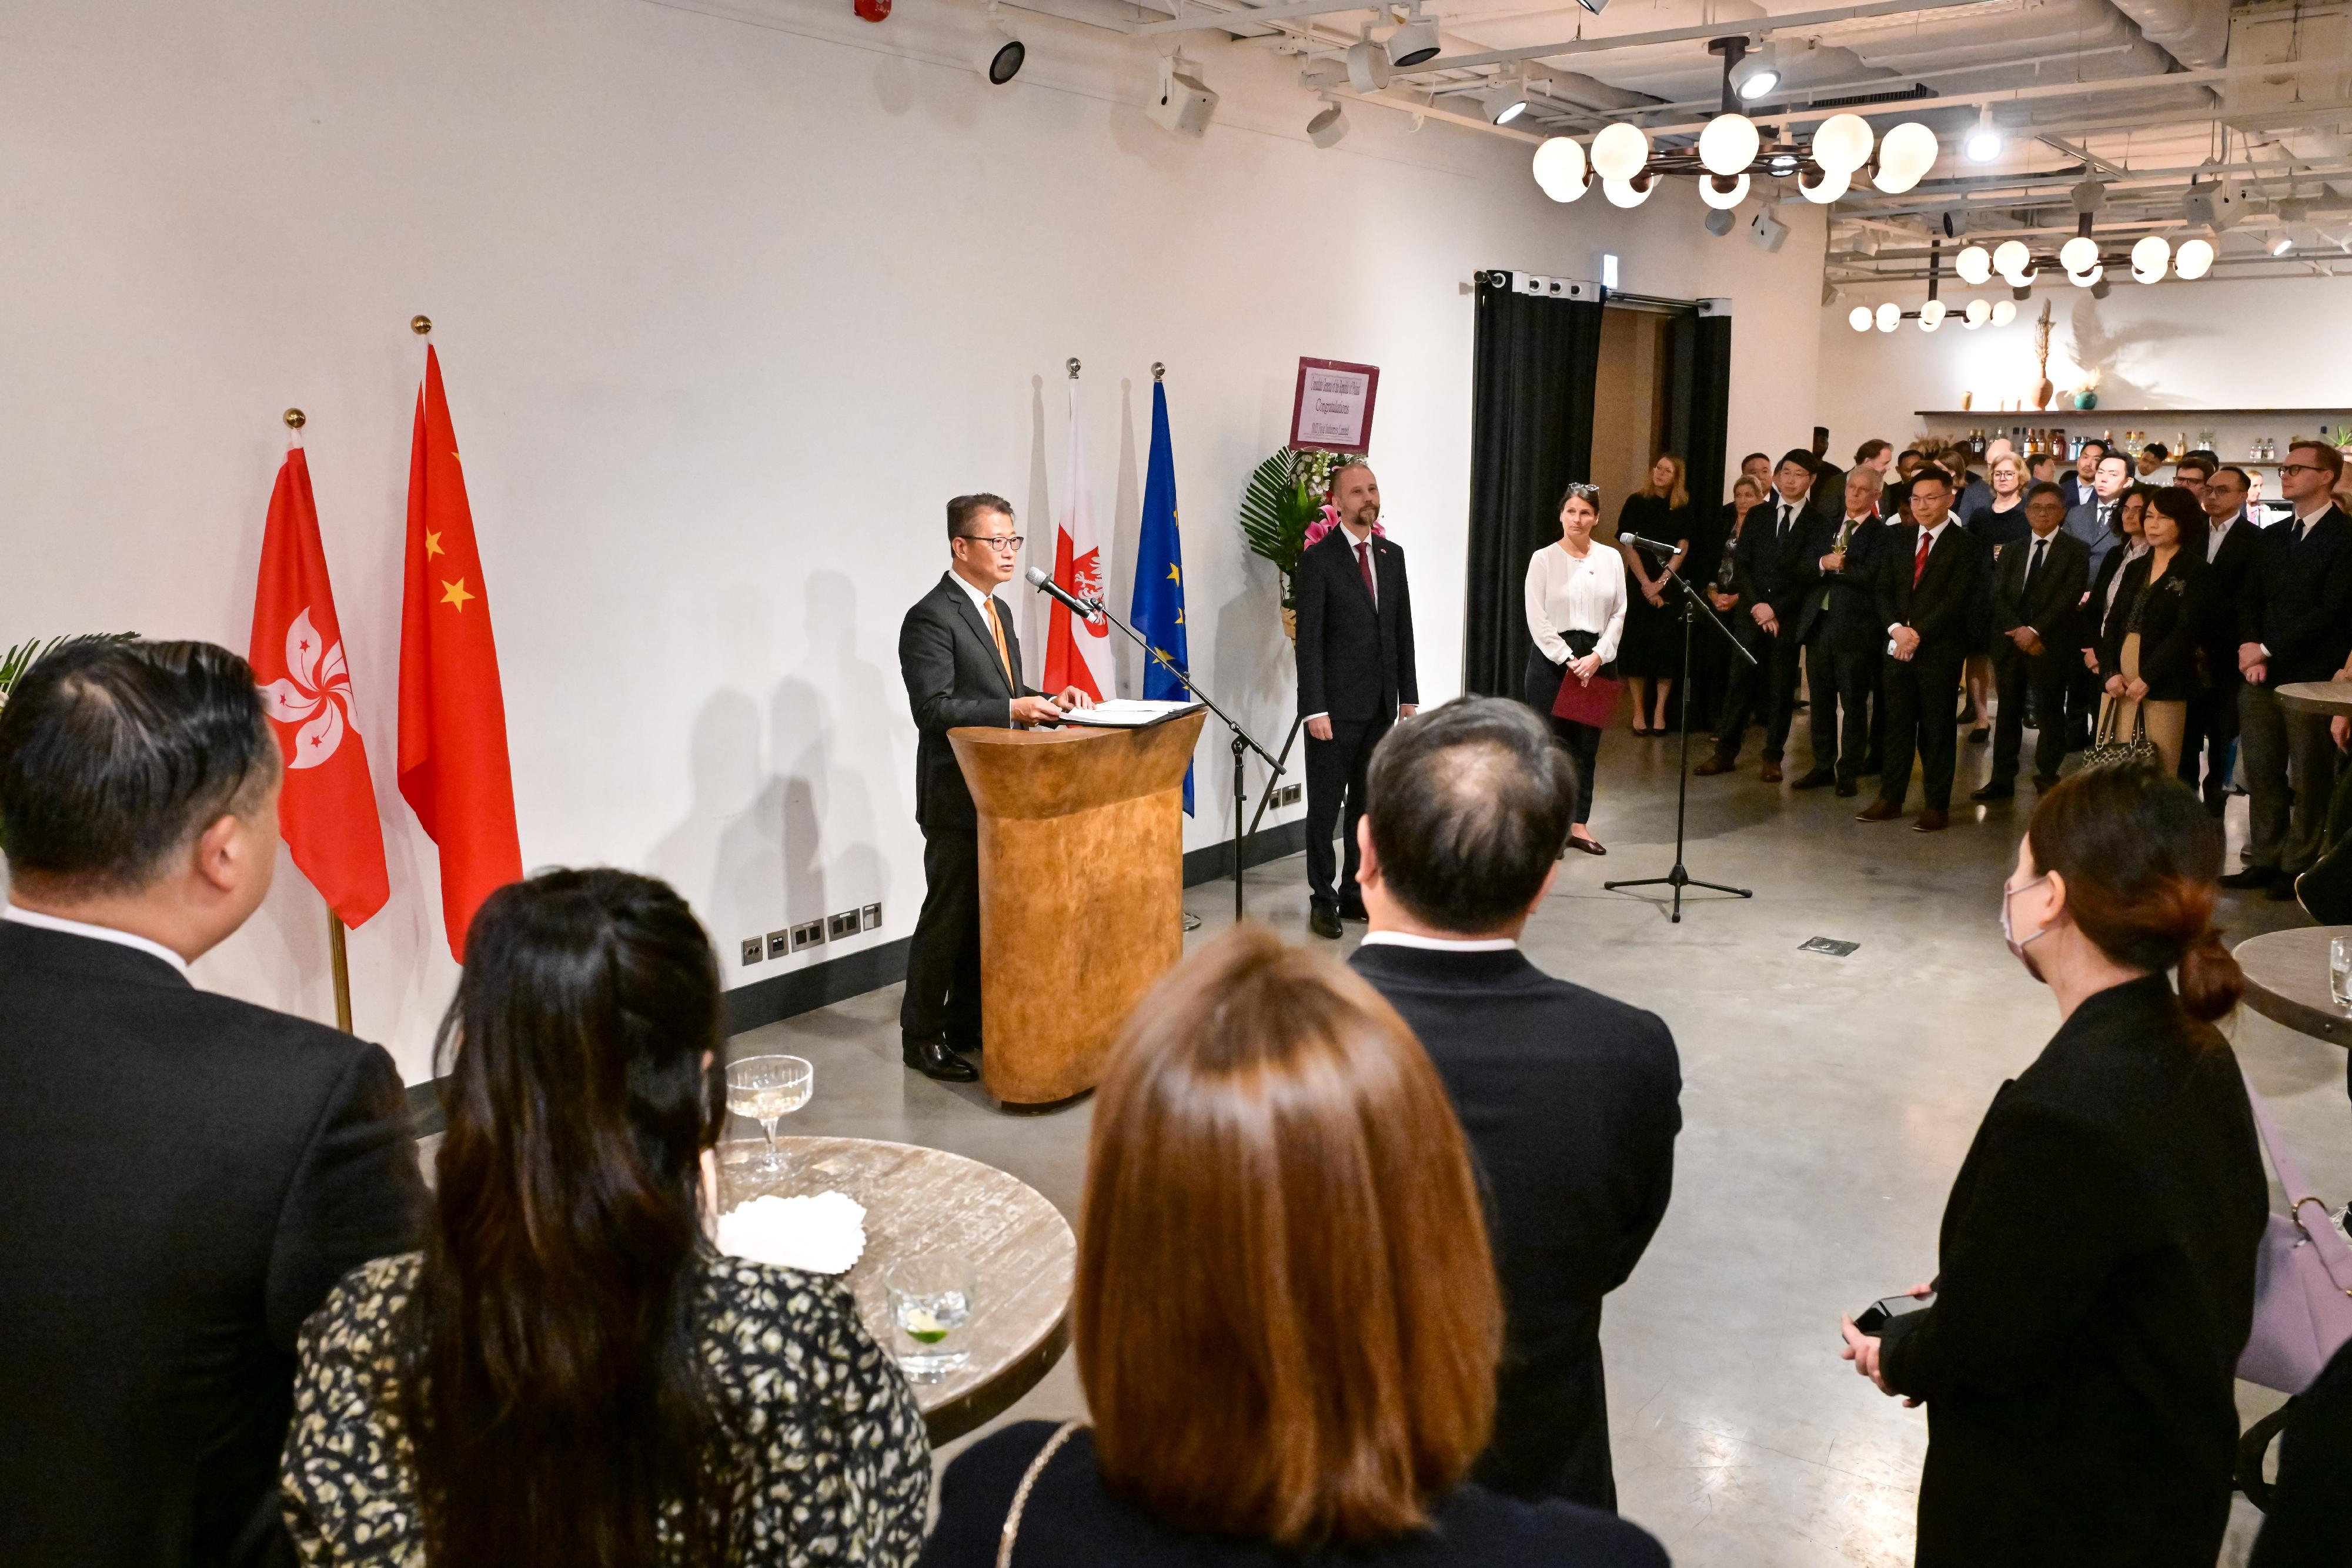 The Financial Secretary, Mr Paul Chan, attends at the Republic of Poland Constitution Day reception today (May 7). Photo shows Mr Chan speaking at the event. Next to him is the Consul General of the Republic of Poland, Mr Michal Kołodziejski.